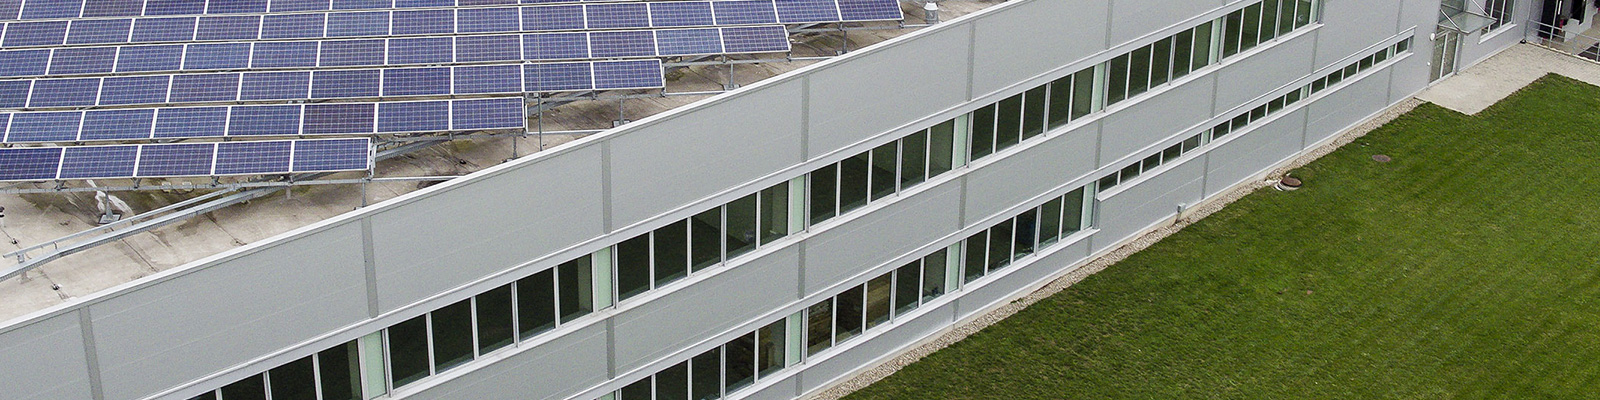 Commercial PV Rooftop plants